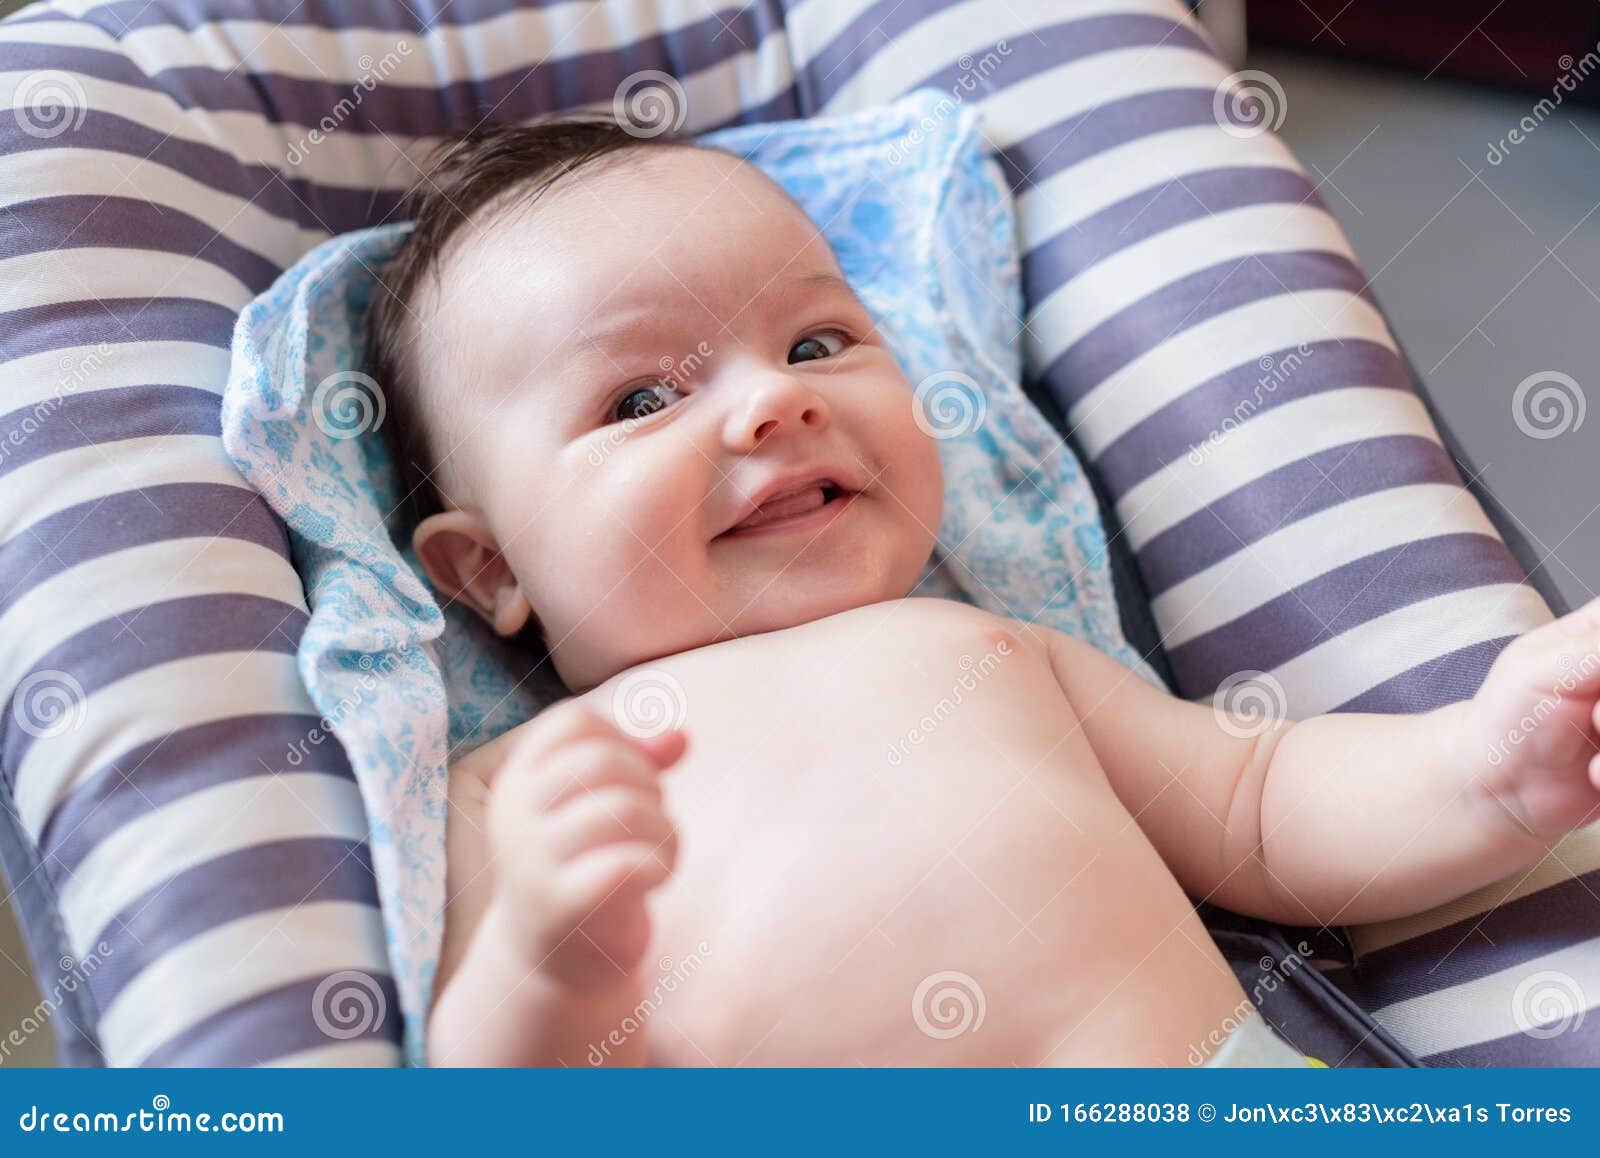 nice and cheerful baby in hammock for babies of rallas